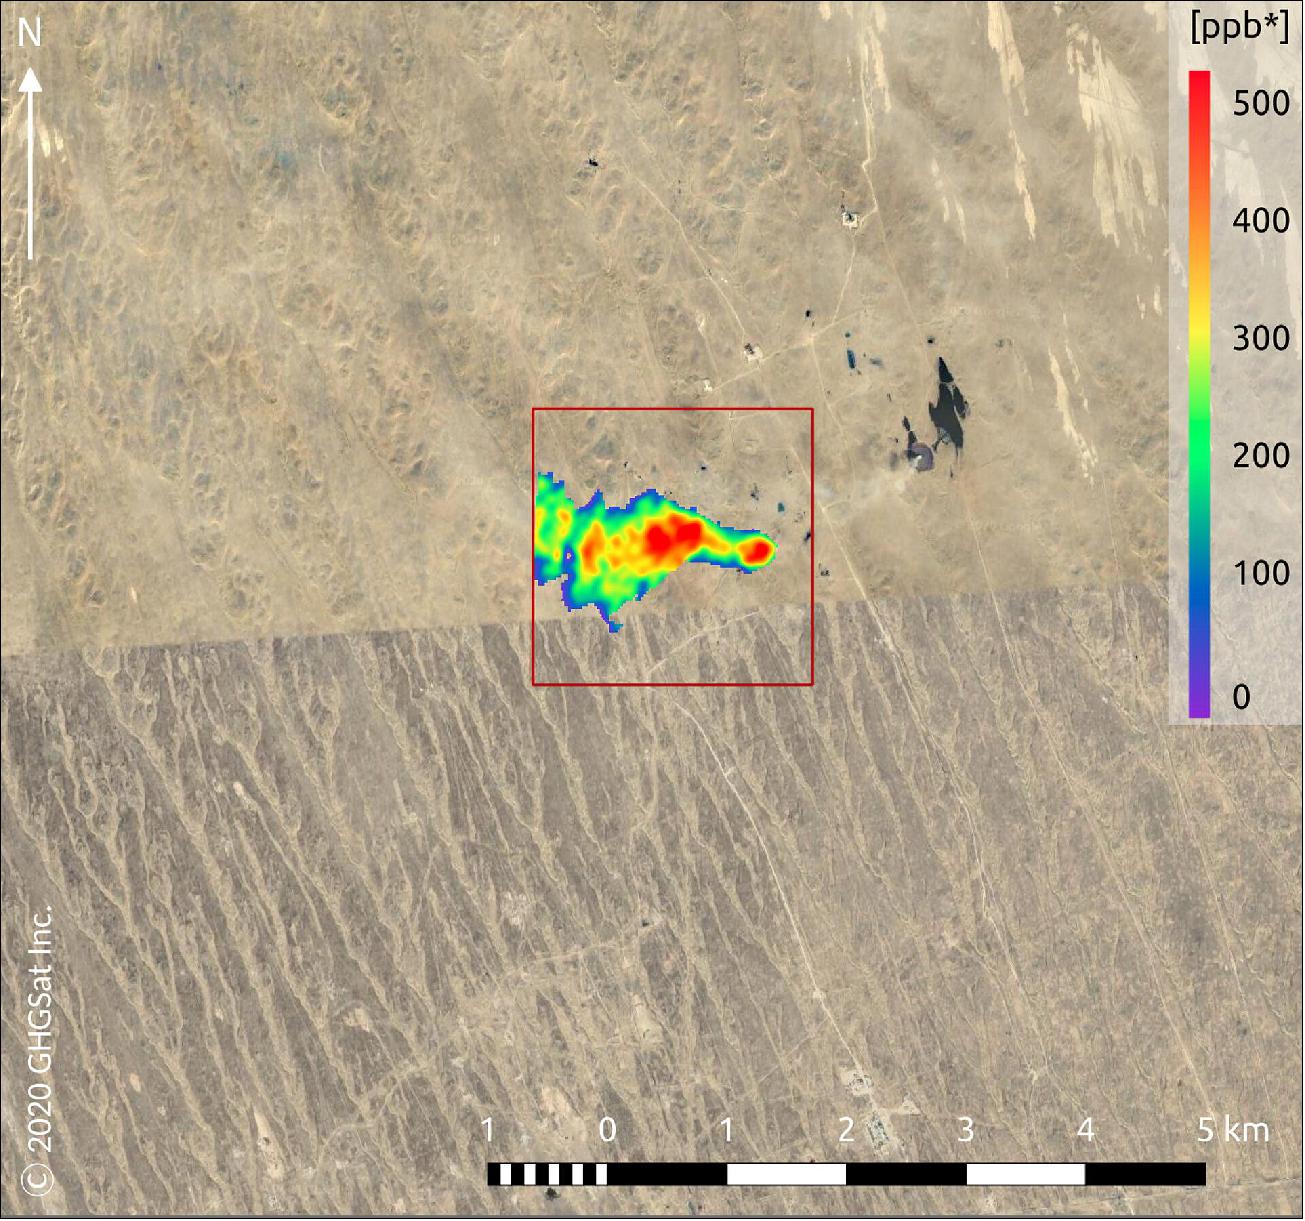 Figure 56: Methane plume from oil & gas infrastructure in the Caspian Sea region. Captured by GHGSat's Claire mission on 21 May 2020, this image shows methane emissions from an onshore oil & gas facility in the Caspian Sea Region. GHGSat is a New Space initiative that draws on Copernicus Sentinel-5P data for mapping methane hotspots. Its Claire satellite has now collected more than 60 000 methane measurements of industrial facilities around the world [image credit: GHGSat (background © 2020 Google map data)]